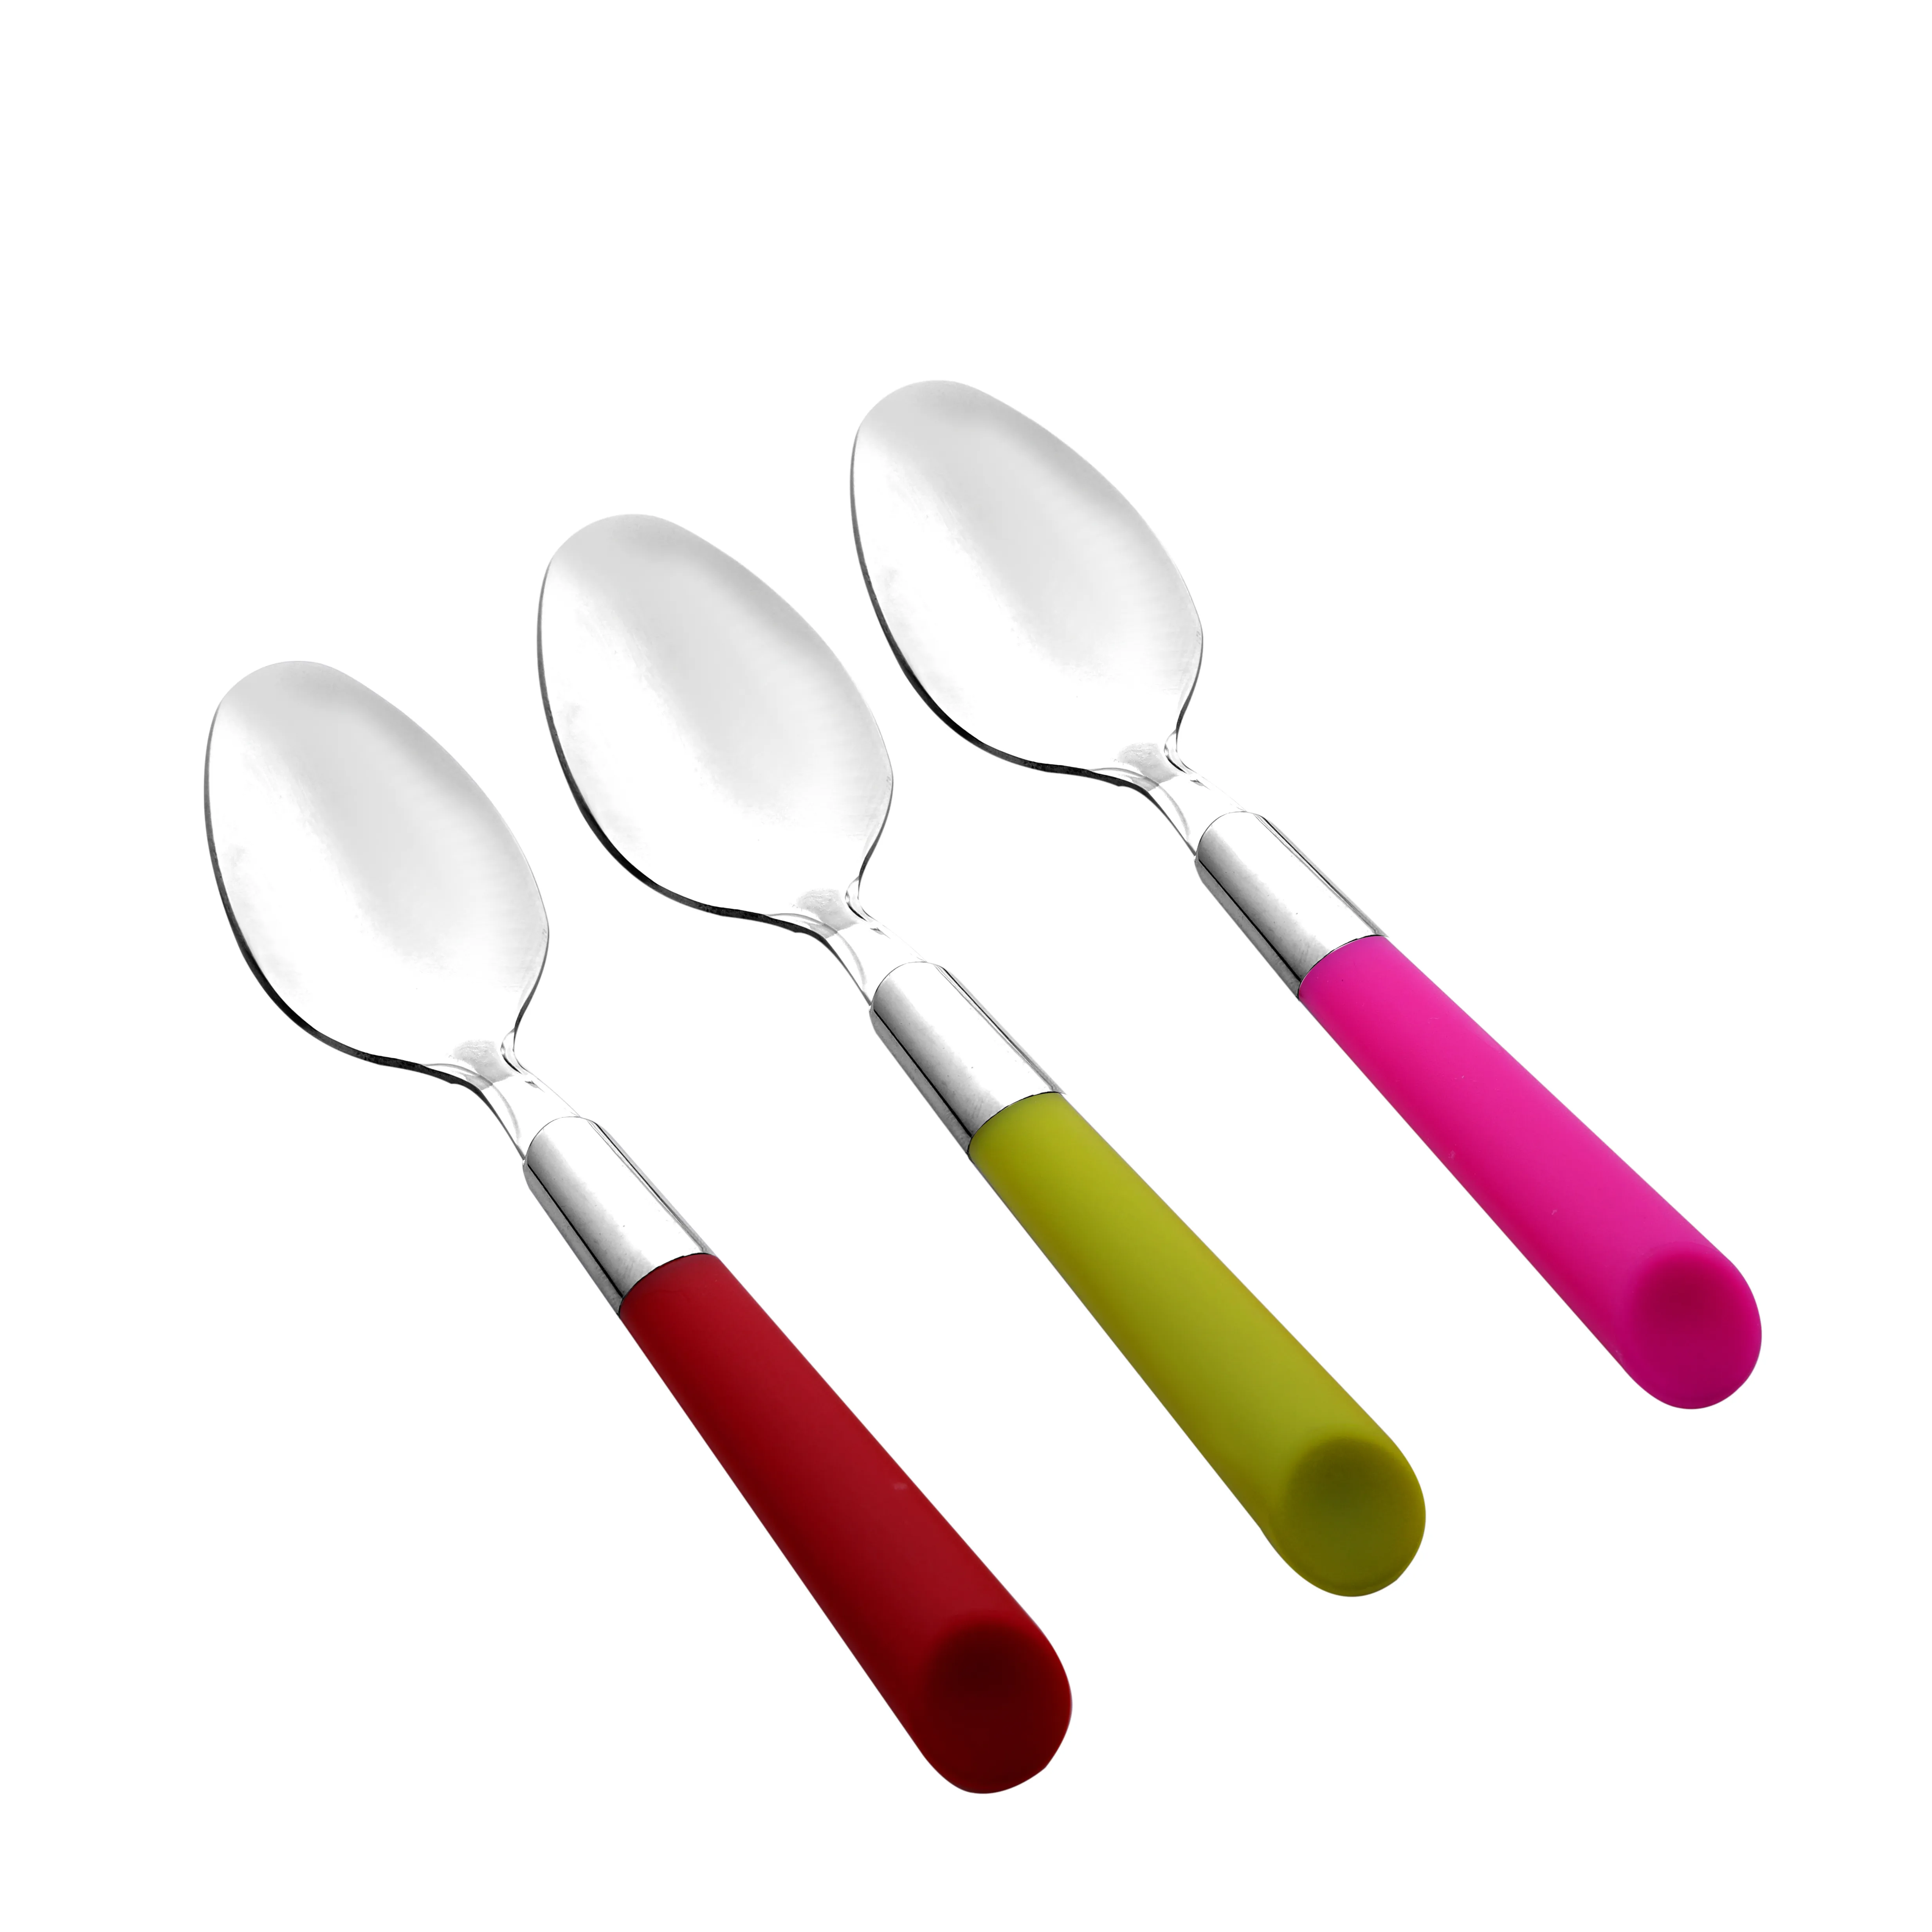 Royalford  3Pcs Tea Spoon - Plain Pattern Cutlery, Dishwasher Safe, Mirror Polished, Ergonomic Handle Stainless Steel Material Perfect for Home, Hotel & More (Sliver & Pink)